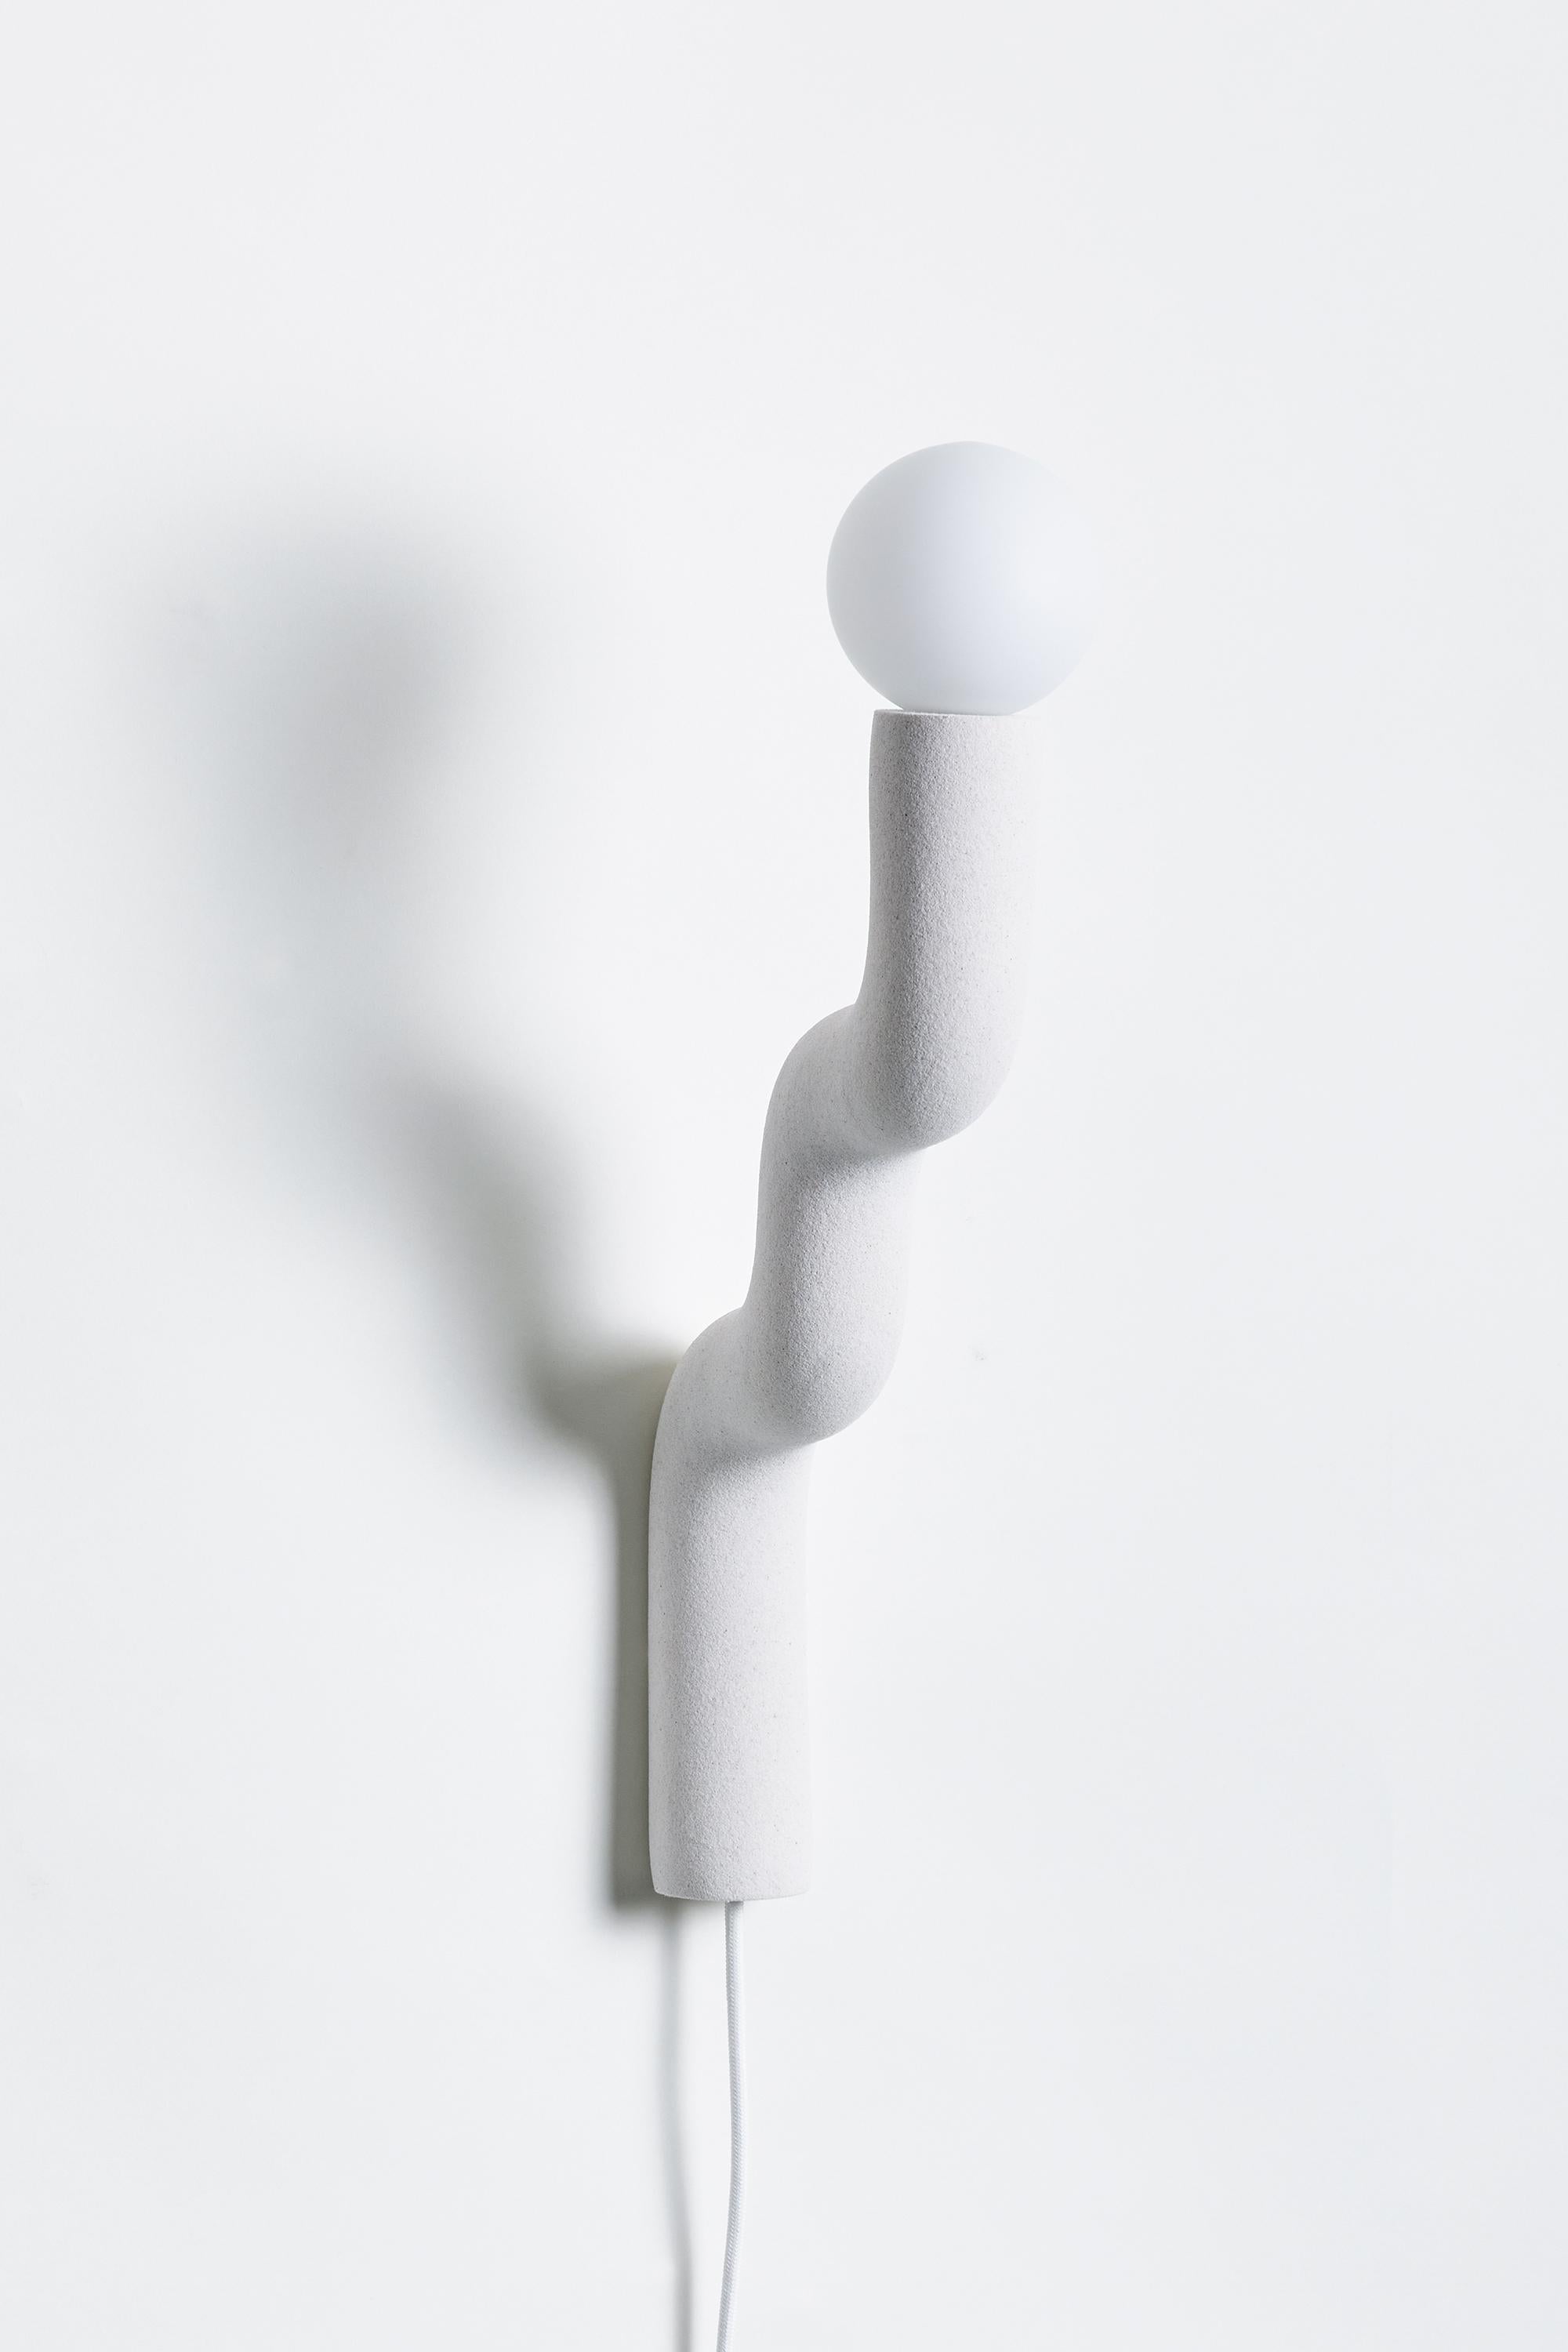 Hotel Light 07 Wall Light by Hot Wire Extensions
Dimensions: D 24.5 x W 9 x H 51.5 cm 
Materials: Waste nylon powder, natural white marble sand, copper pipe, hand-blown glass bulbs, natural cotton electrical cord.
2.5 kg

Different sands and colors